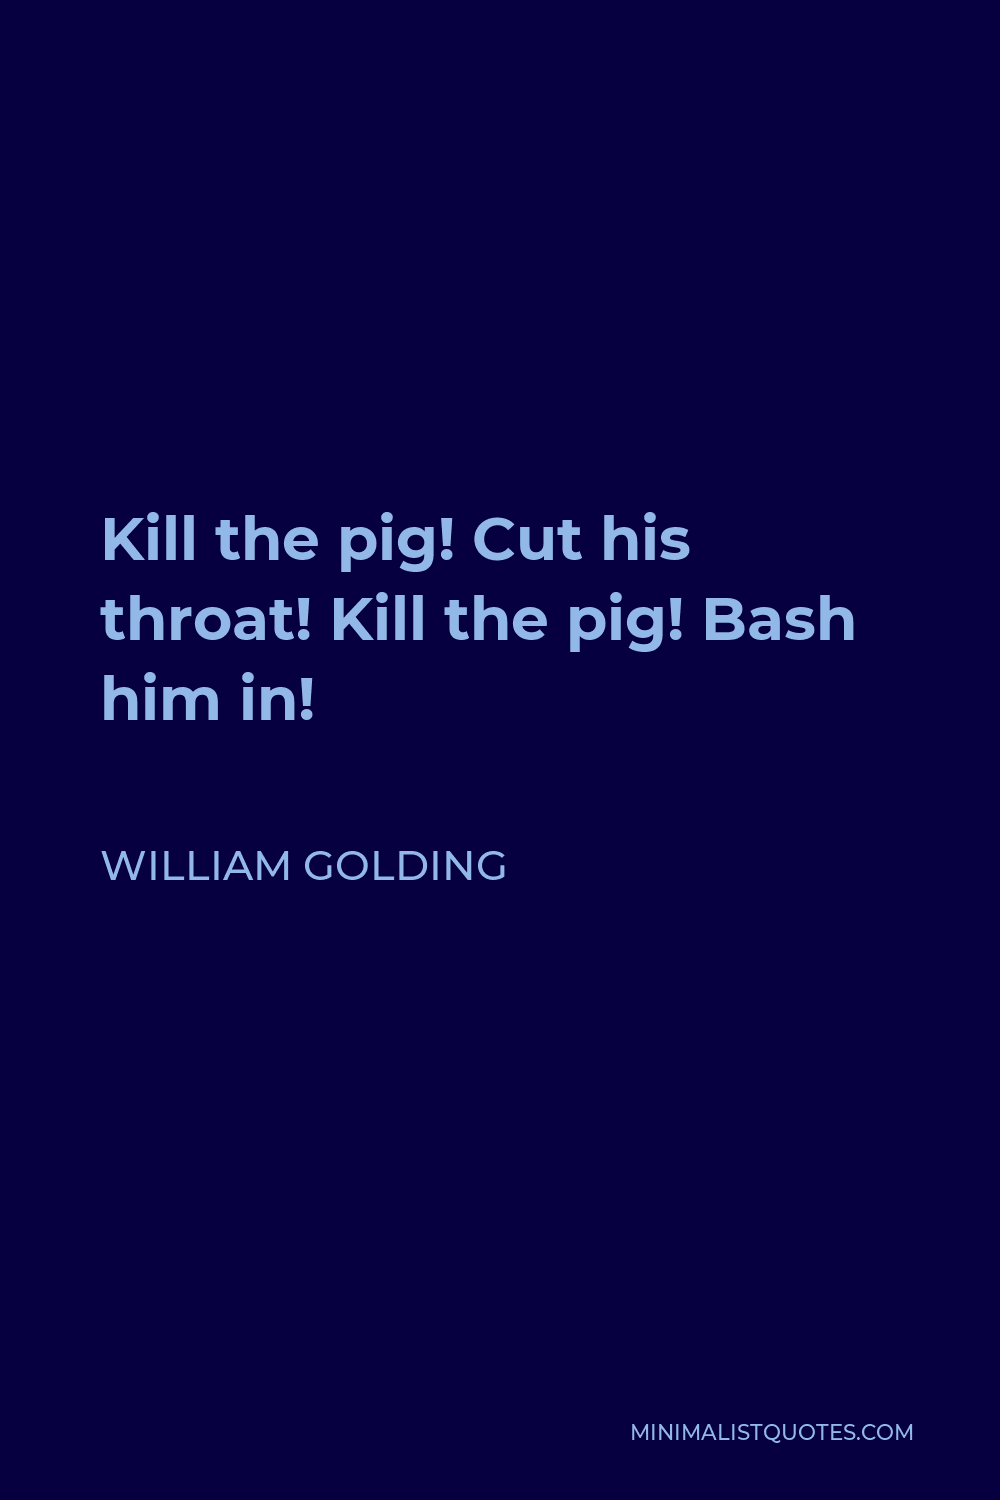 William Golding Quote - Kill the pig! Cut his throat! Kill the pig! Bash him in!